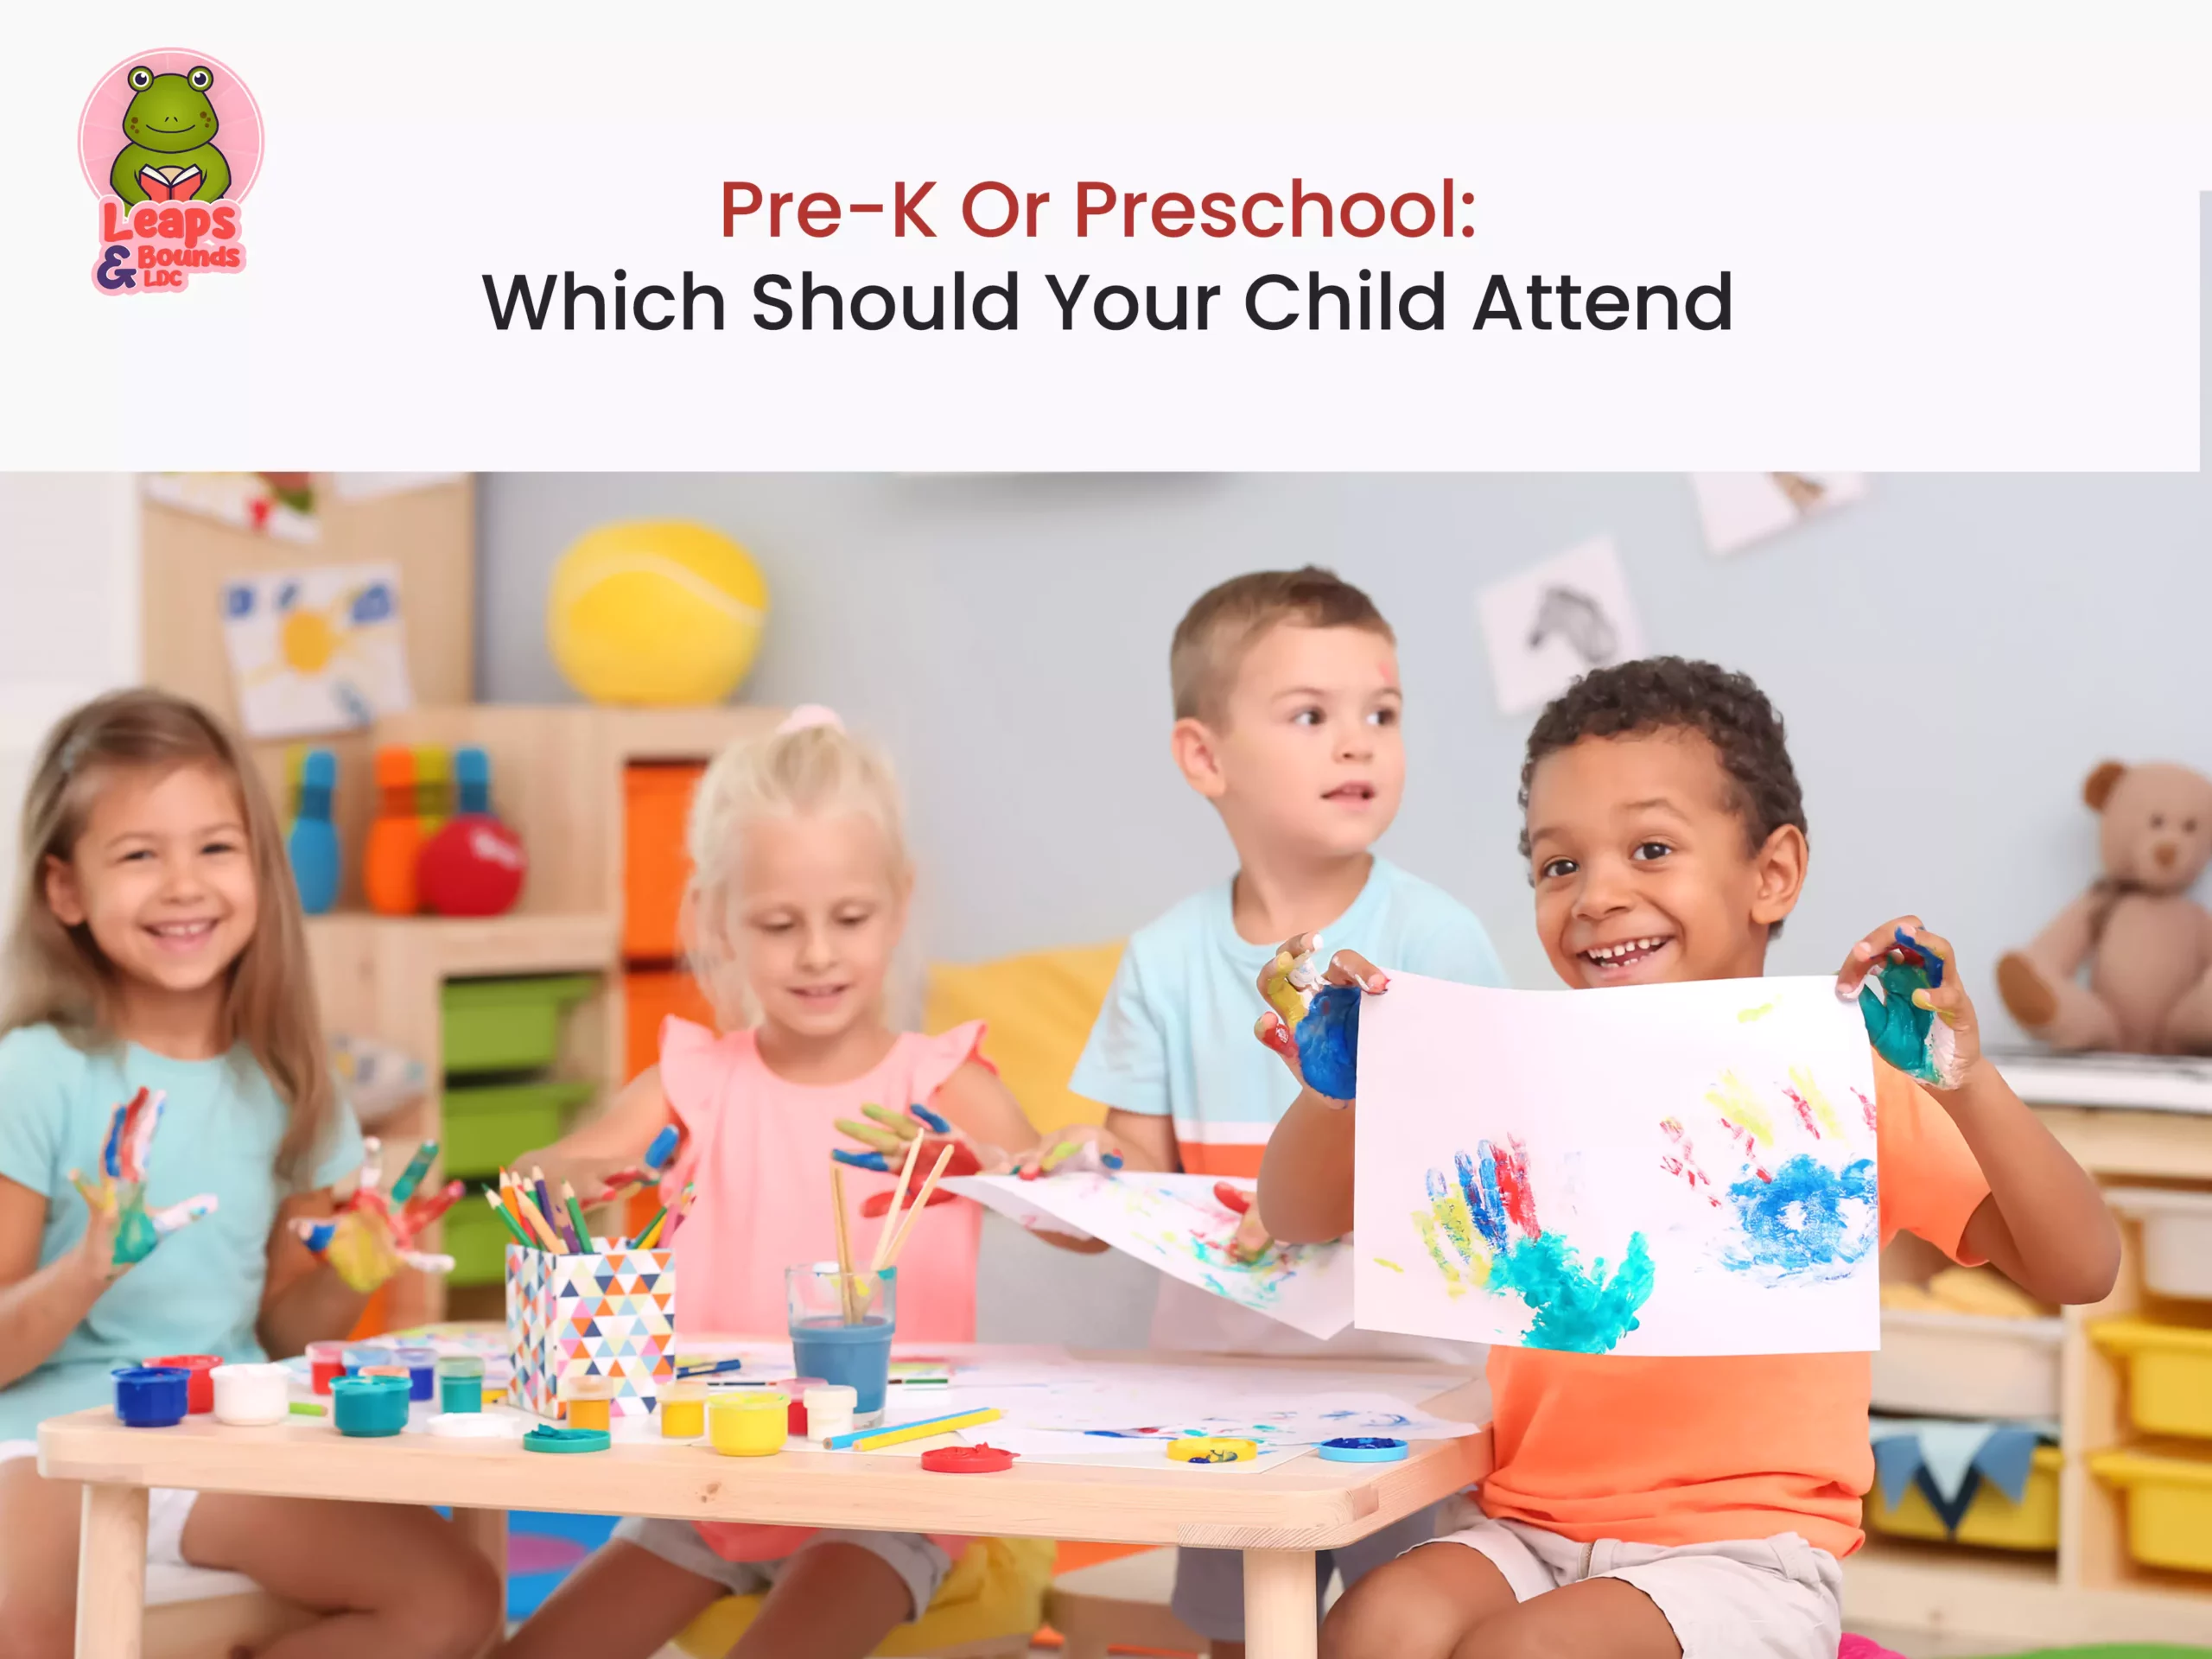 Pre-K Or Preschool: Which Should Your Child Attend